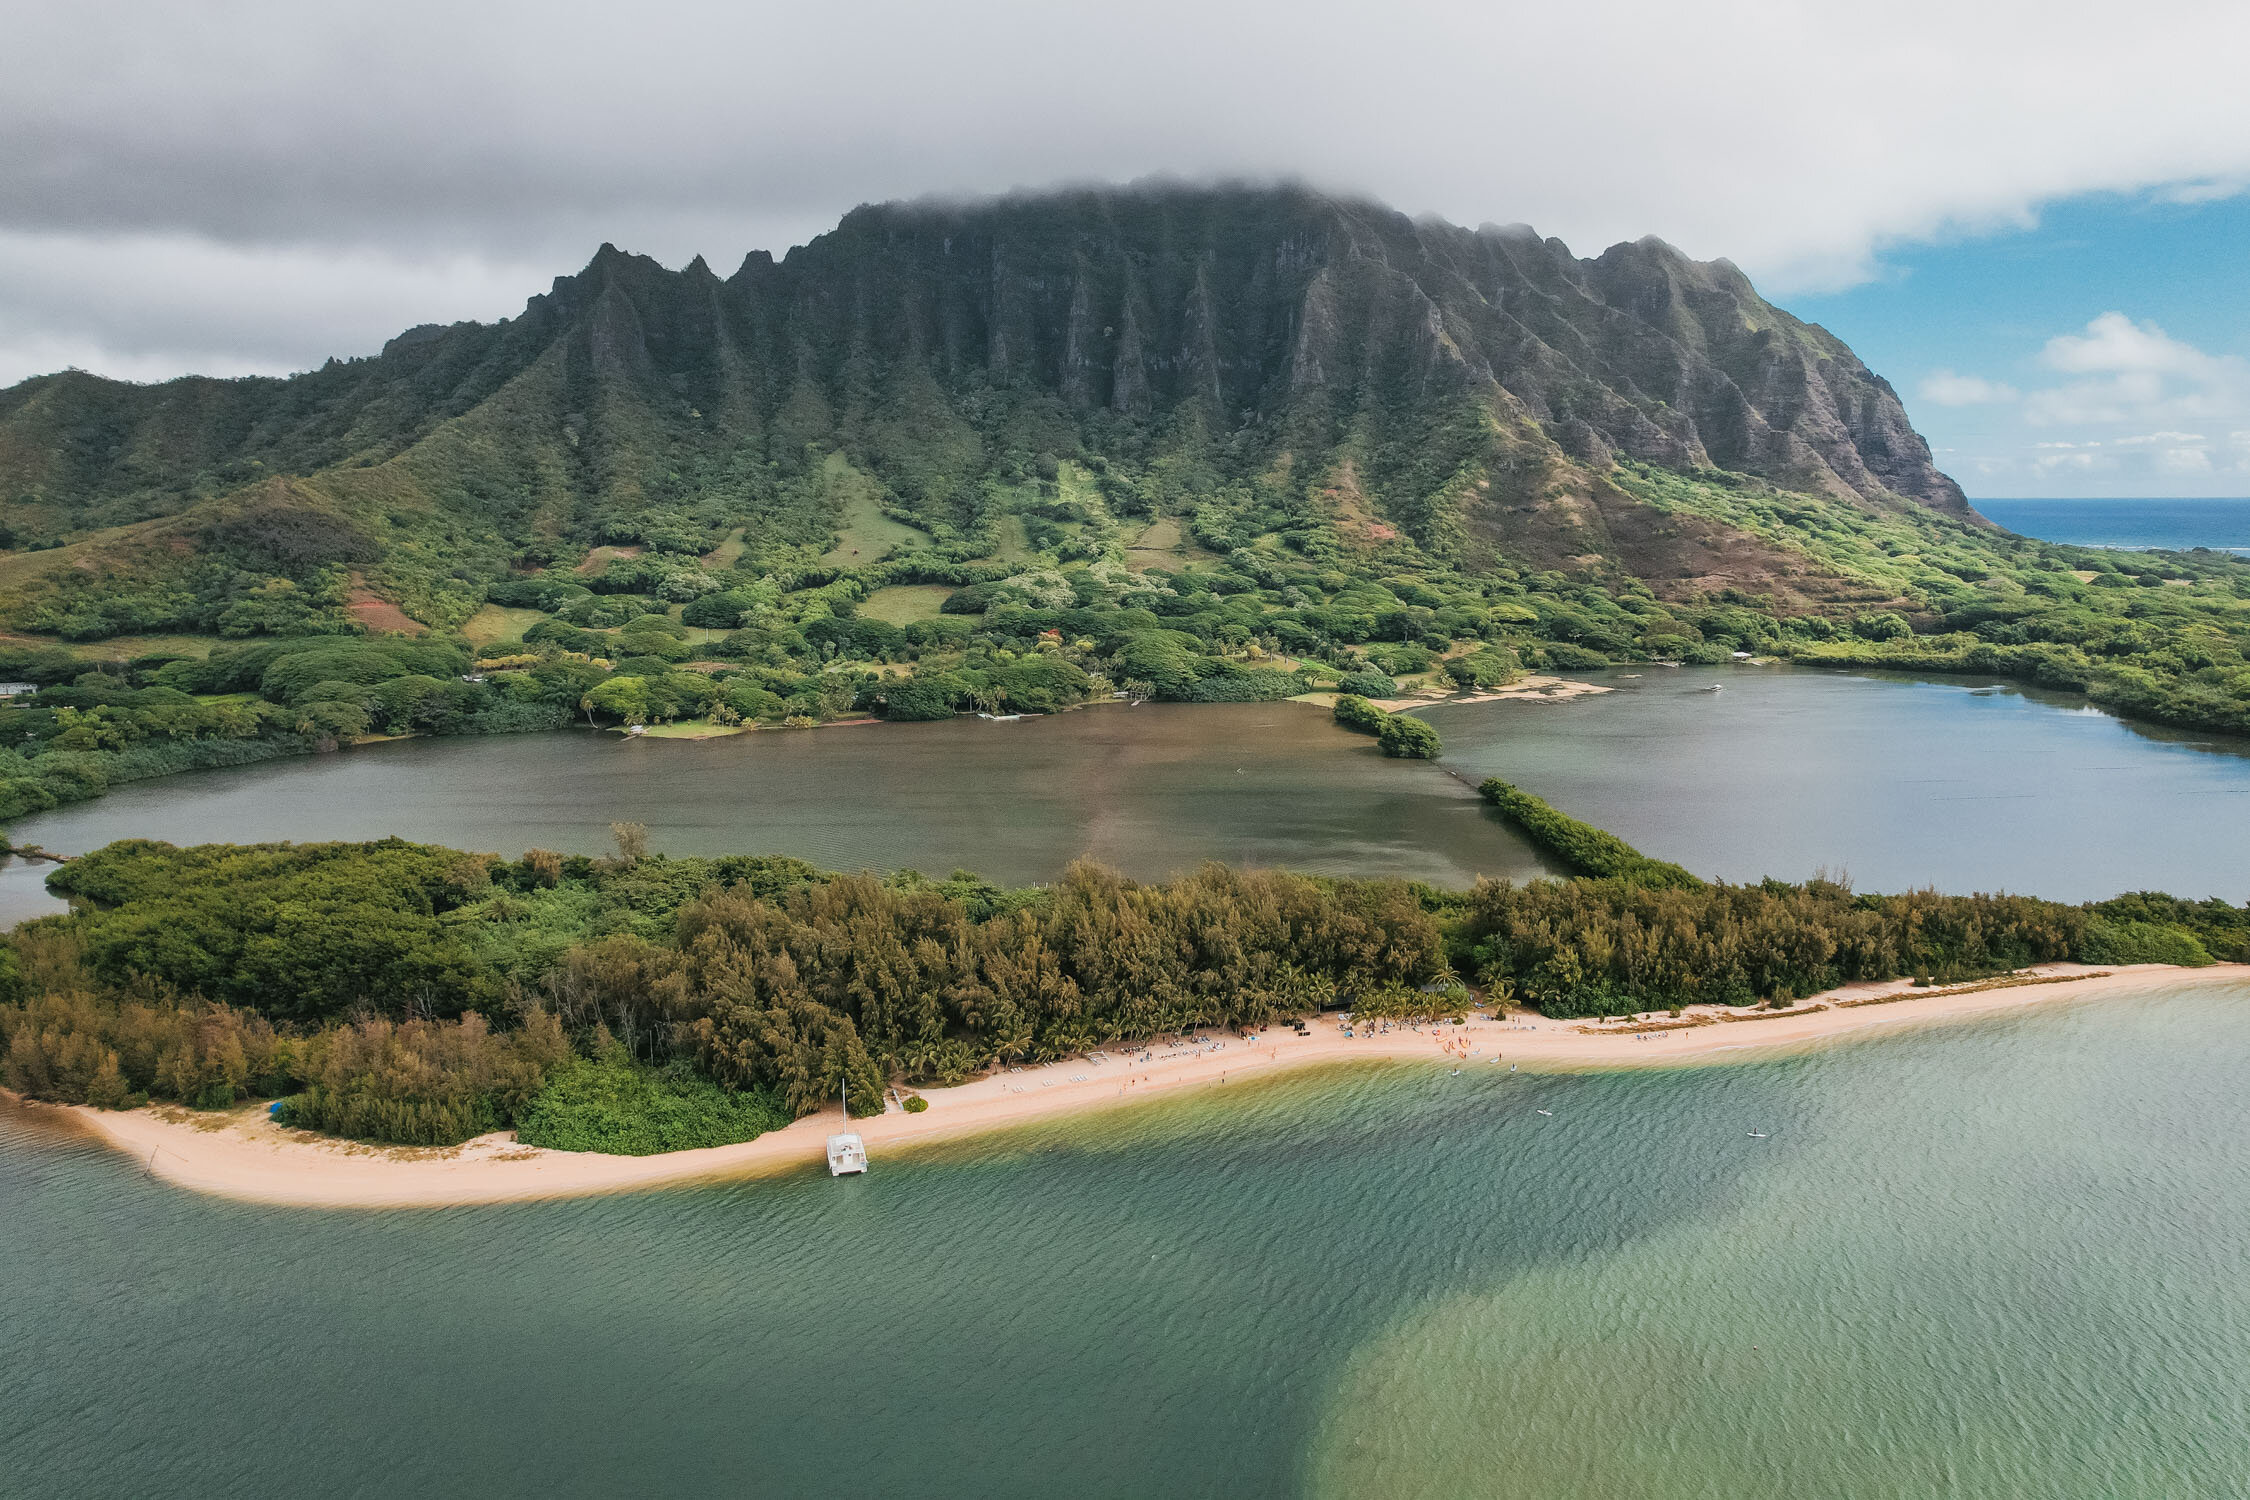 Kualoa Ranch and Secret Island by drone; The Quick Guide to Visiting Oahu, Hawaii